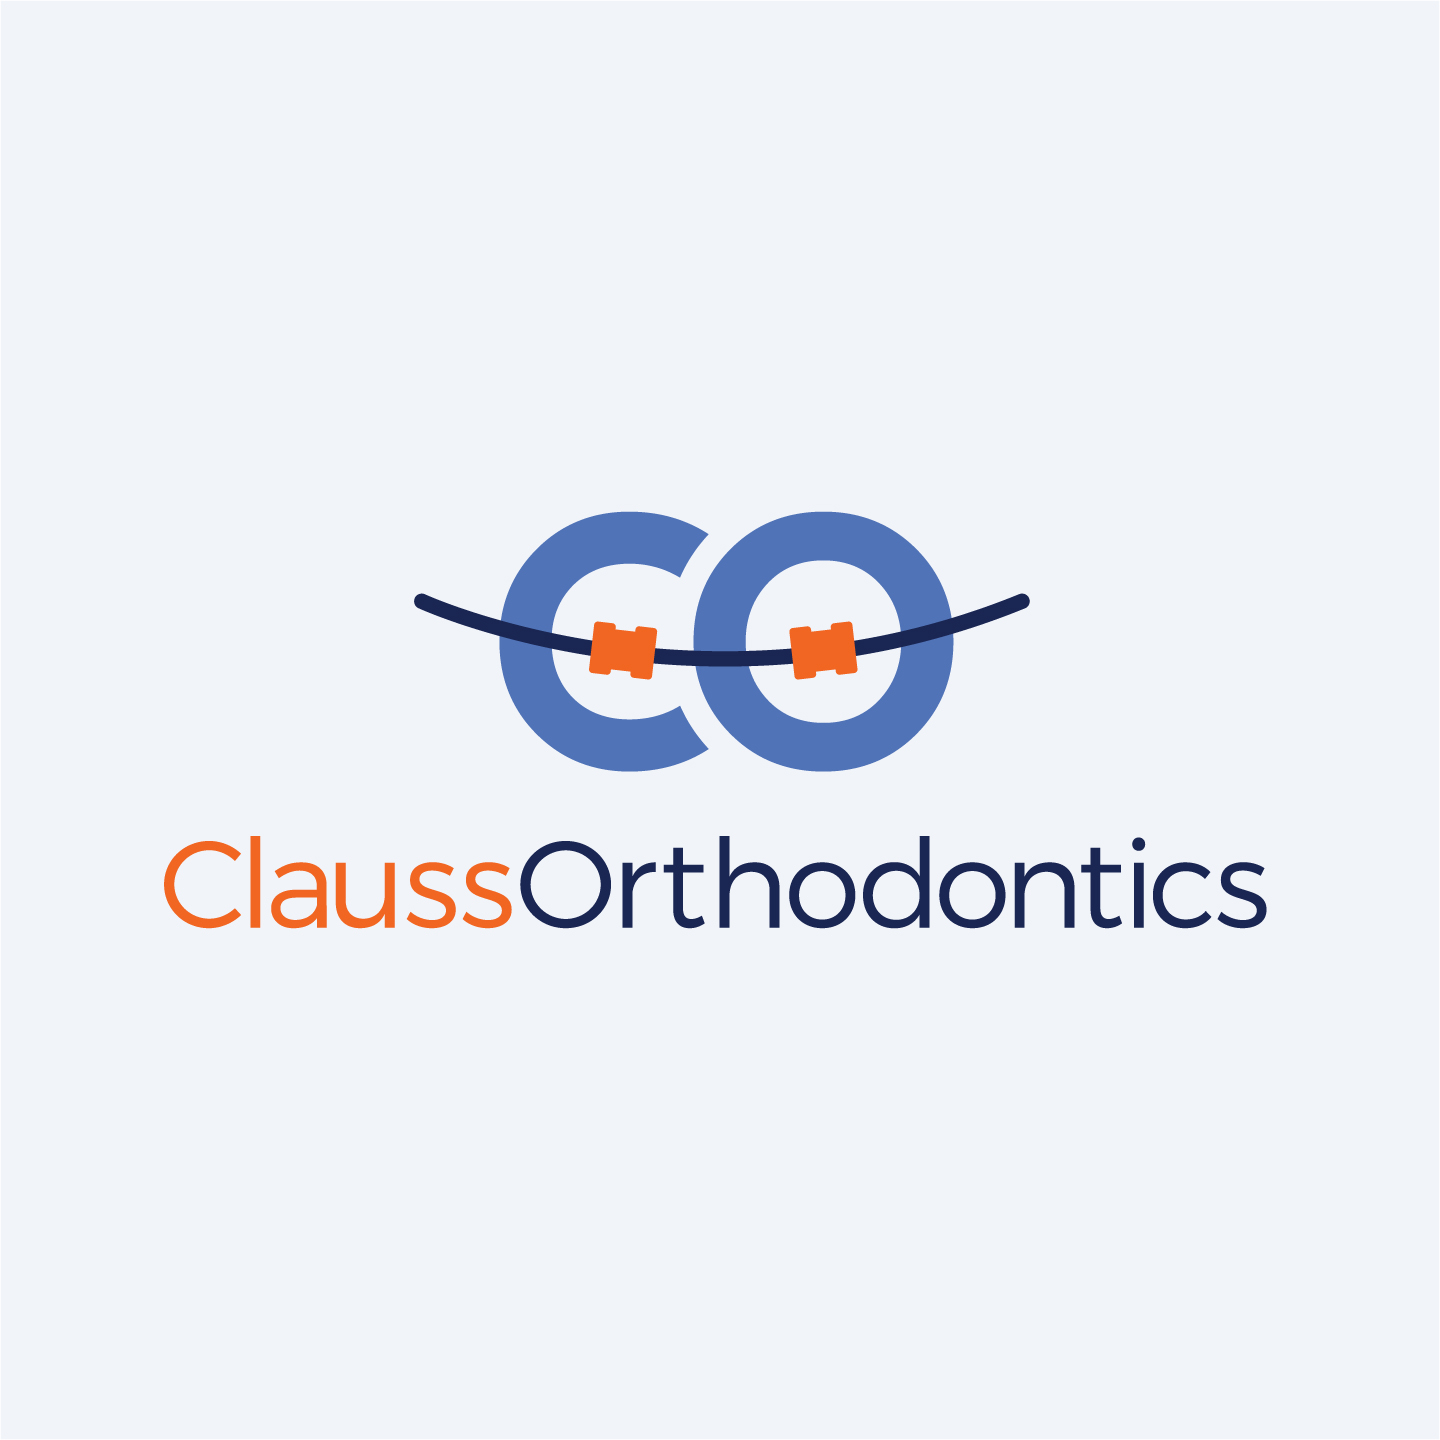 Clauss Orthodontics logo by Hunter Oden of oden.house